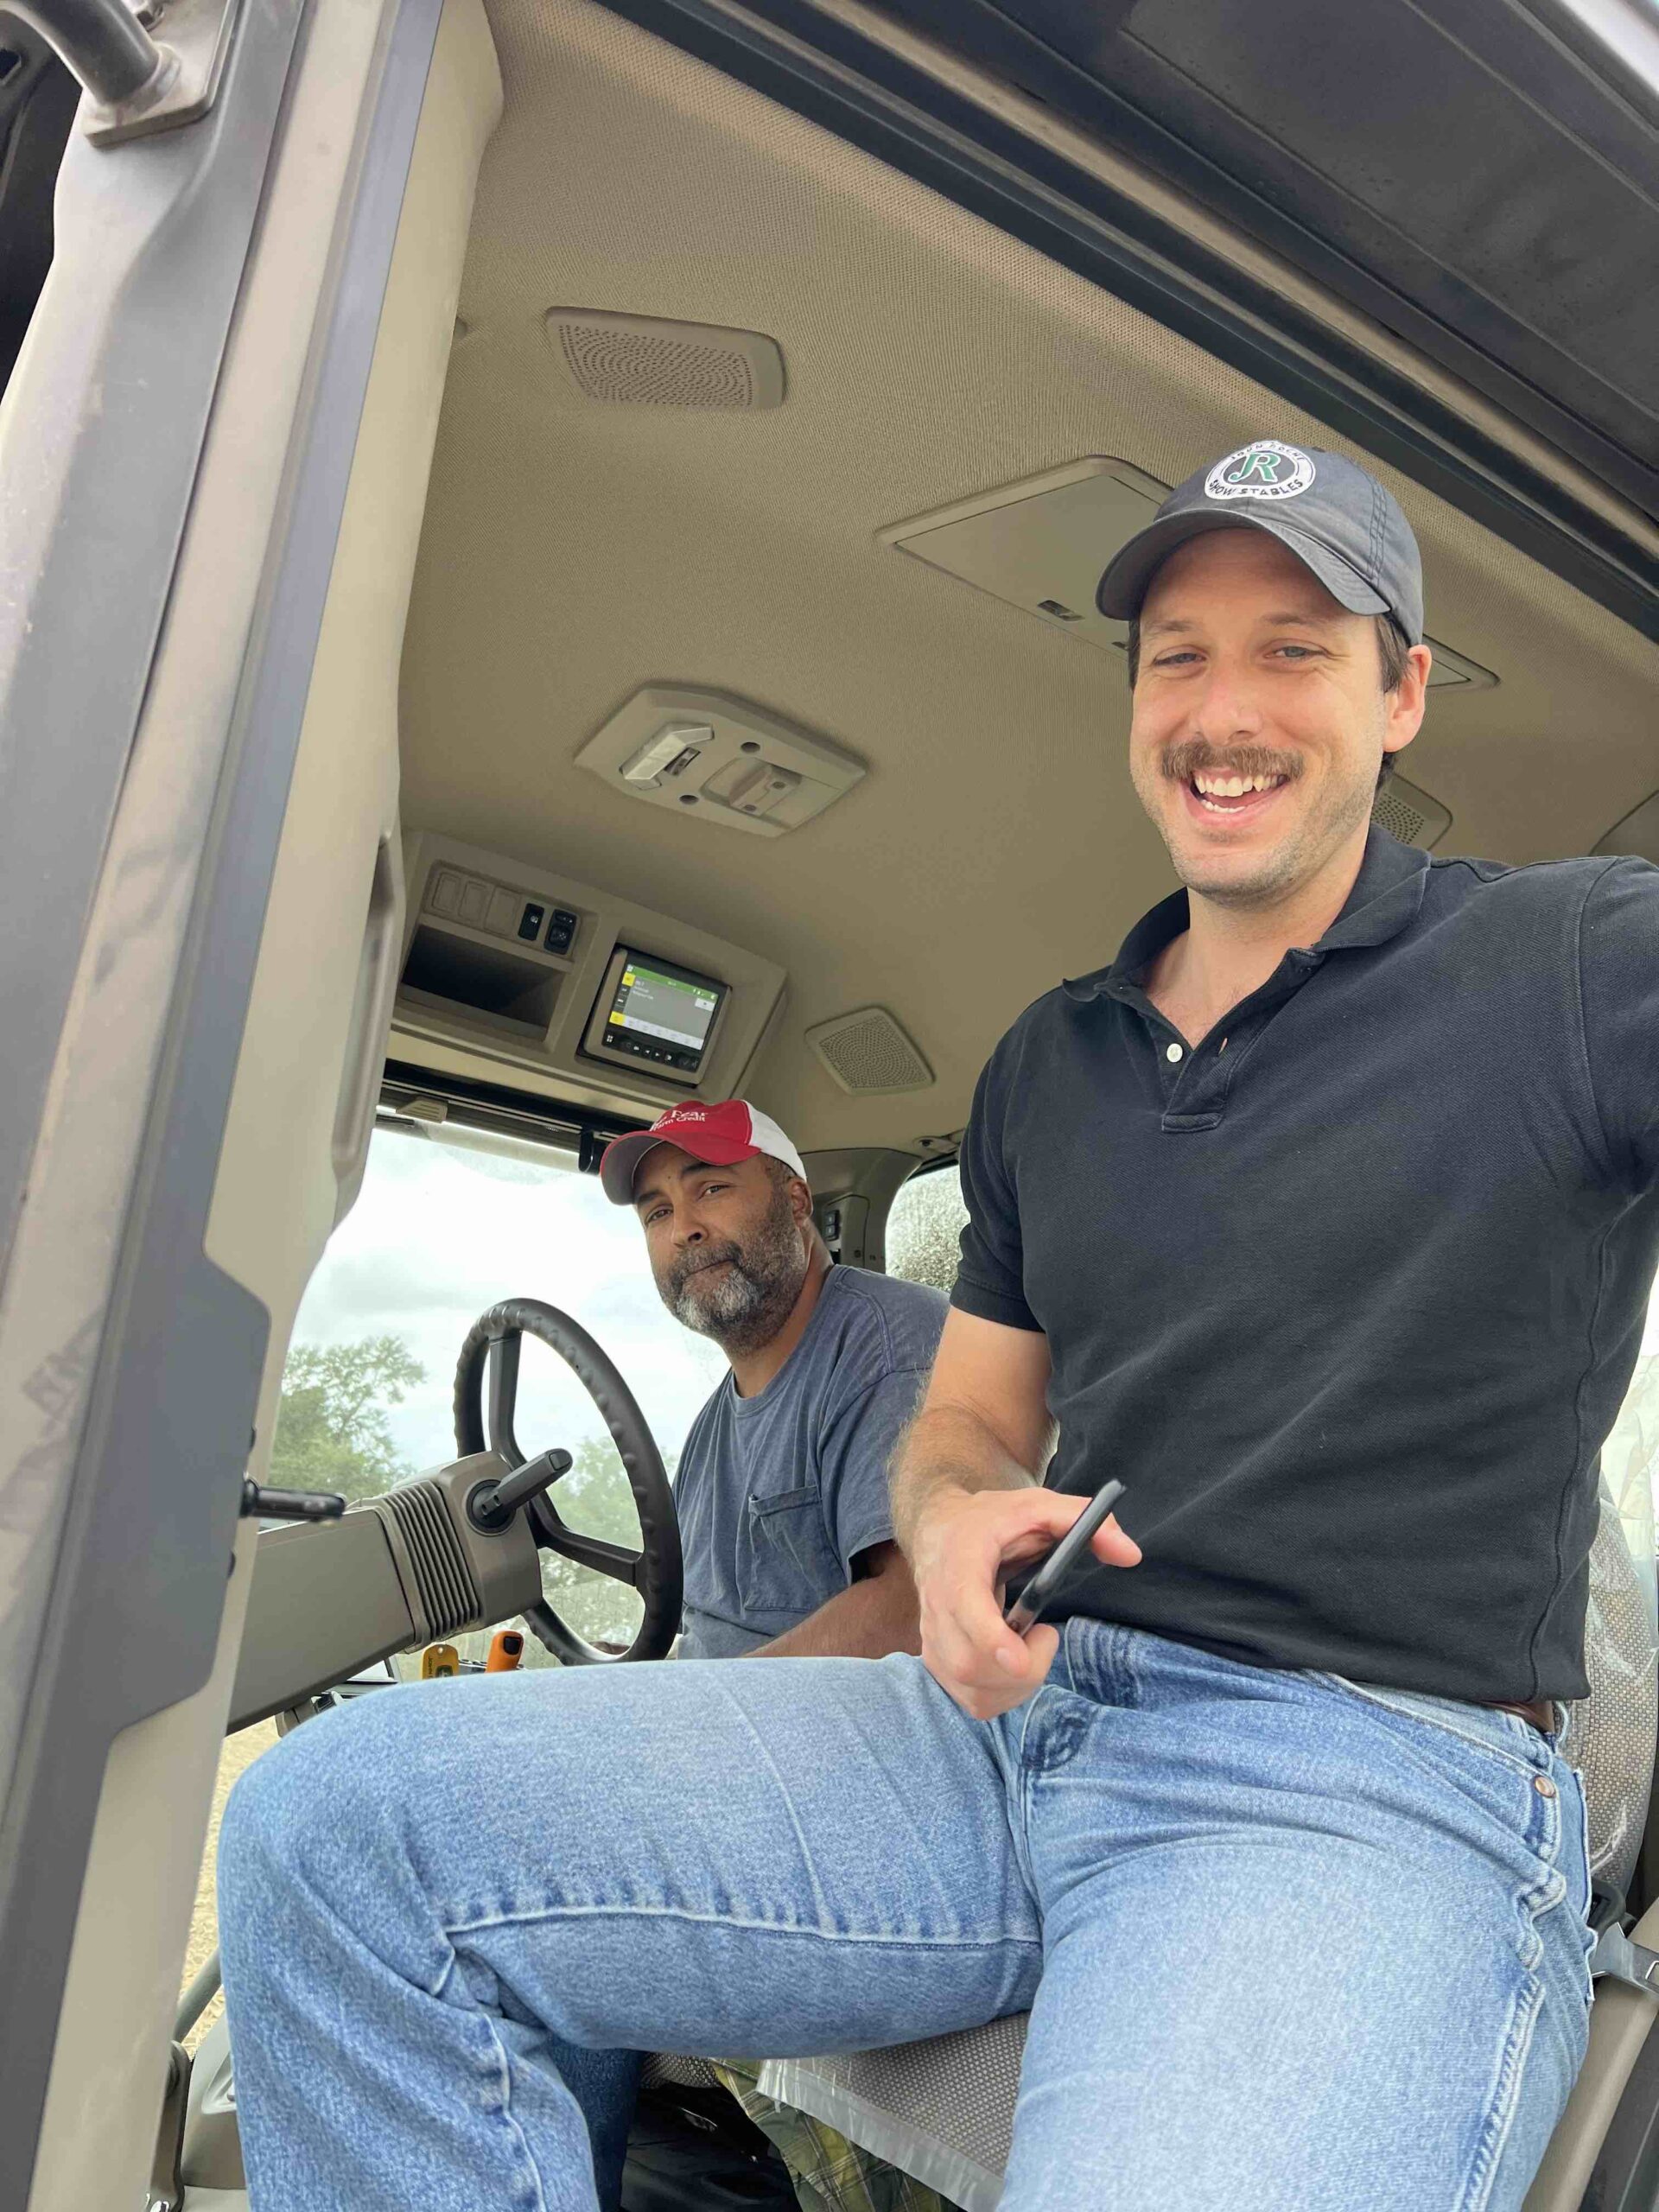 Austin Menker exits the cab of a tractor after riding with a NC farmer to plant cover crops.